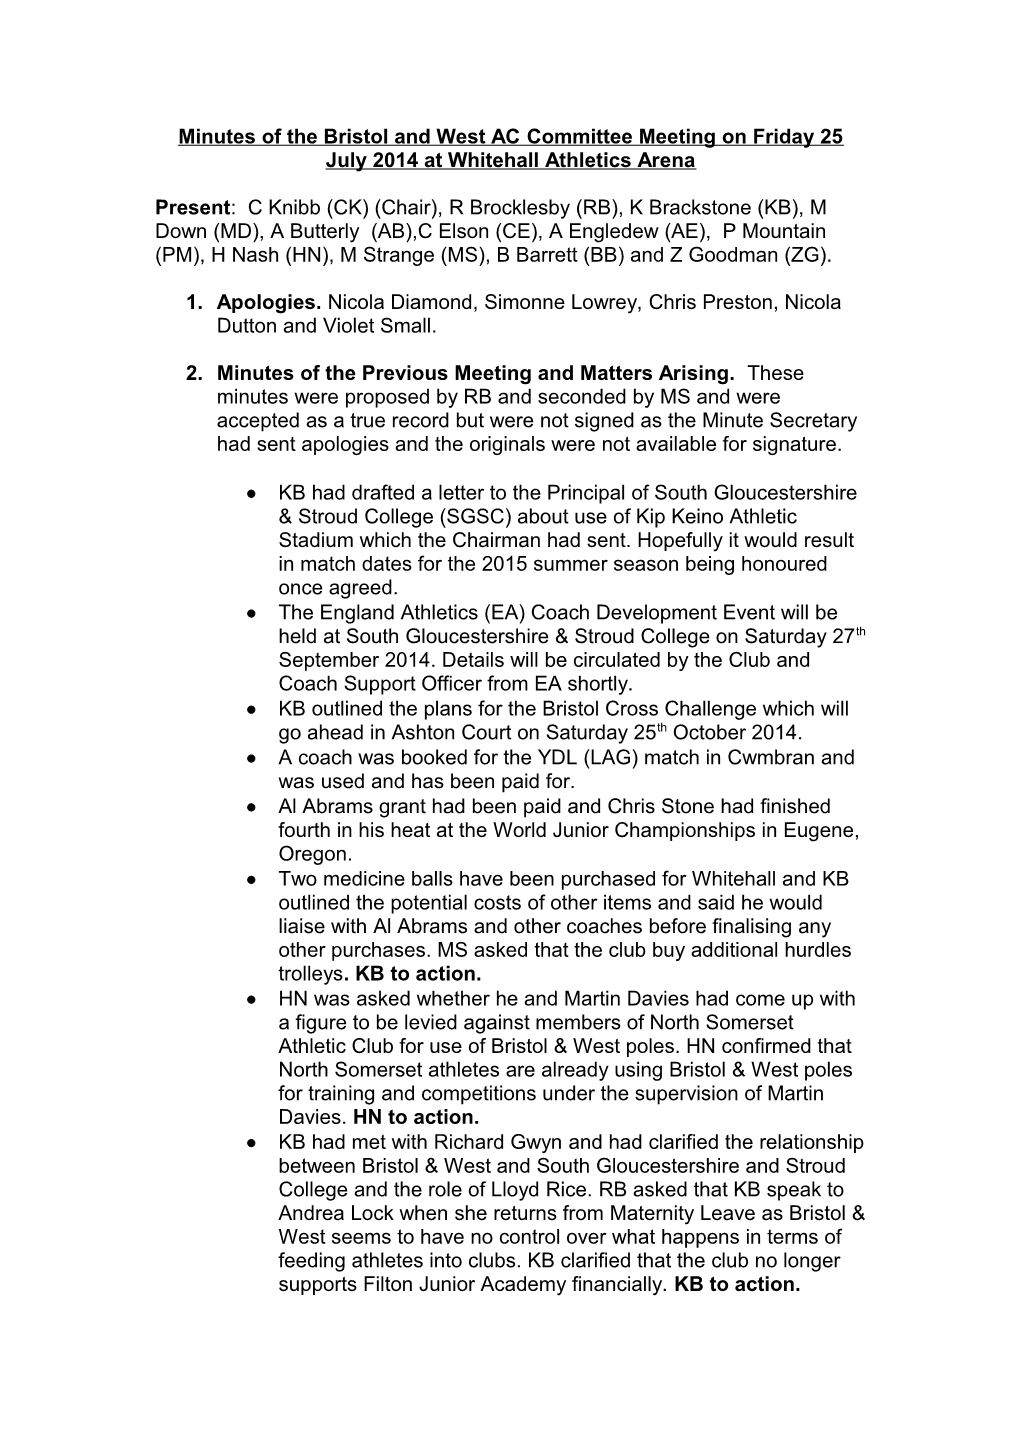 Minutes of the Bristol and West AC Committee Meeting on Friday 25 April 2014 at Whitehall